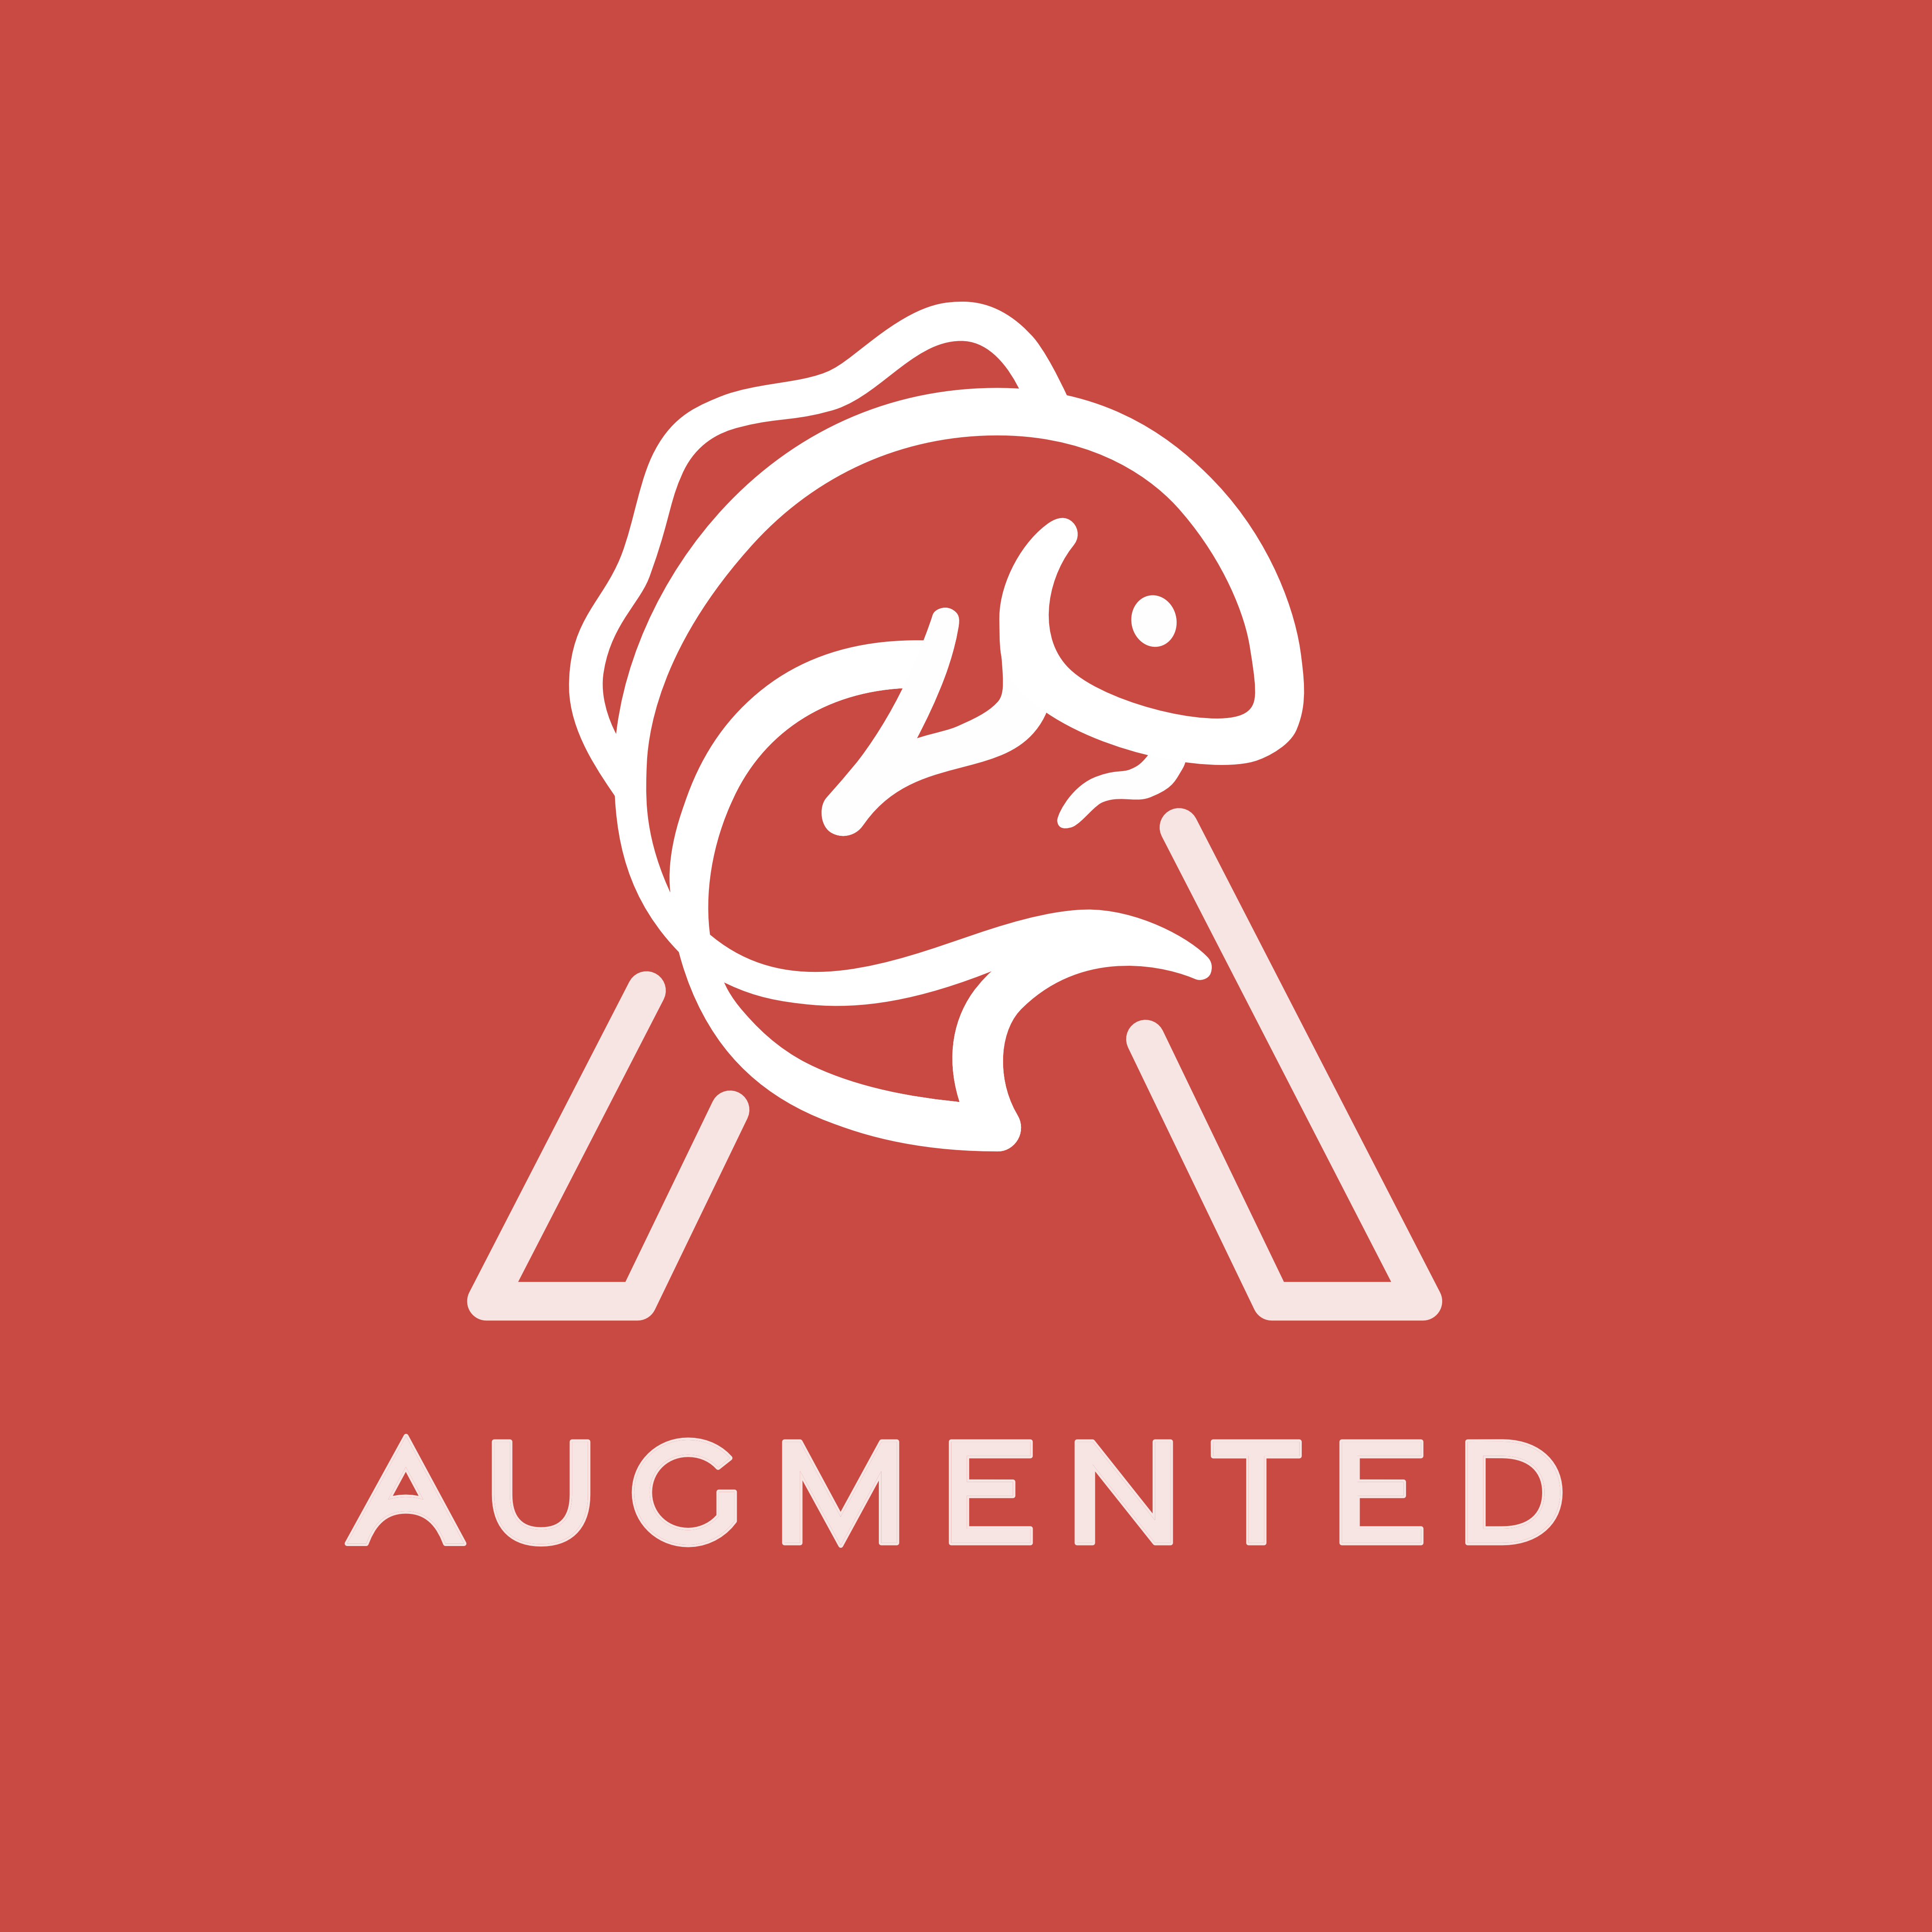 Make It Augmented